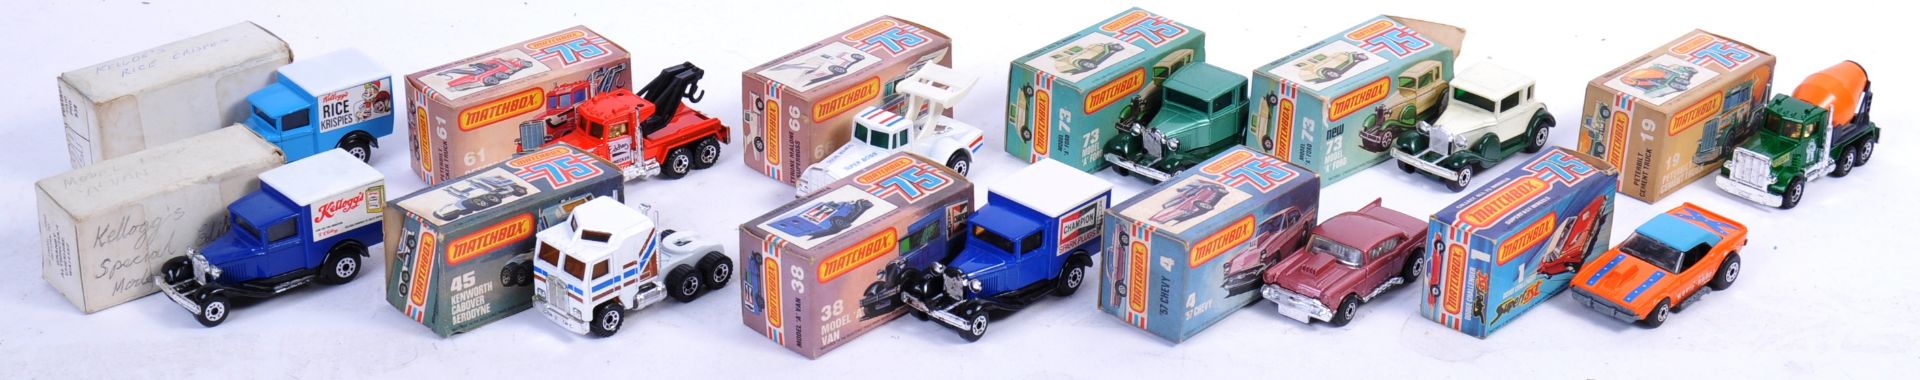 COLLECTION OF VINTAGE MATCHBOX BOXED DIECAST MODELS